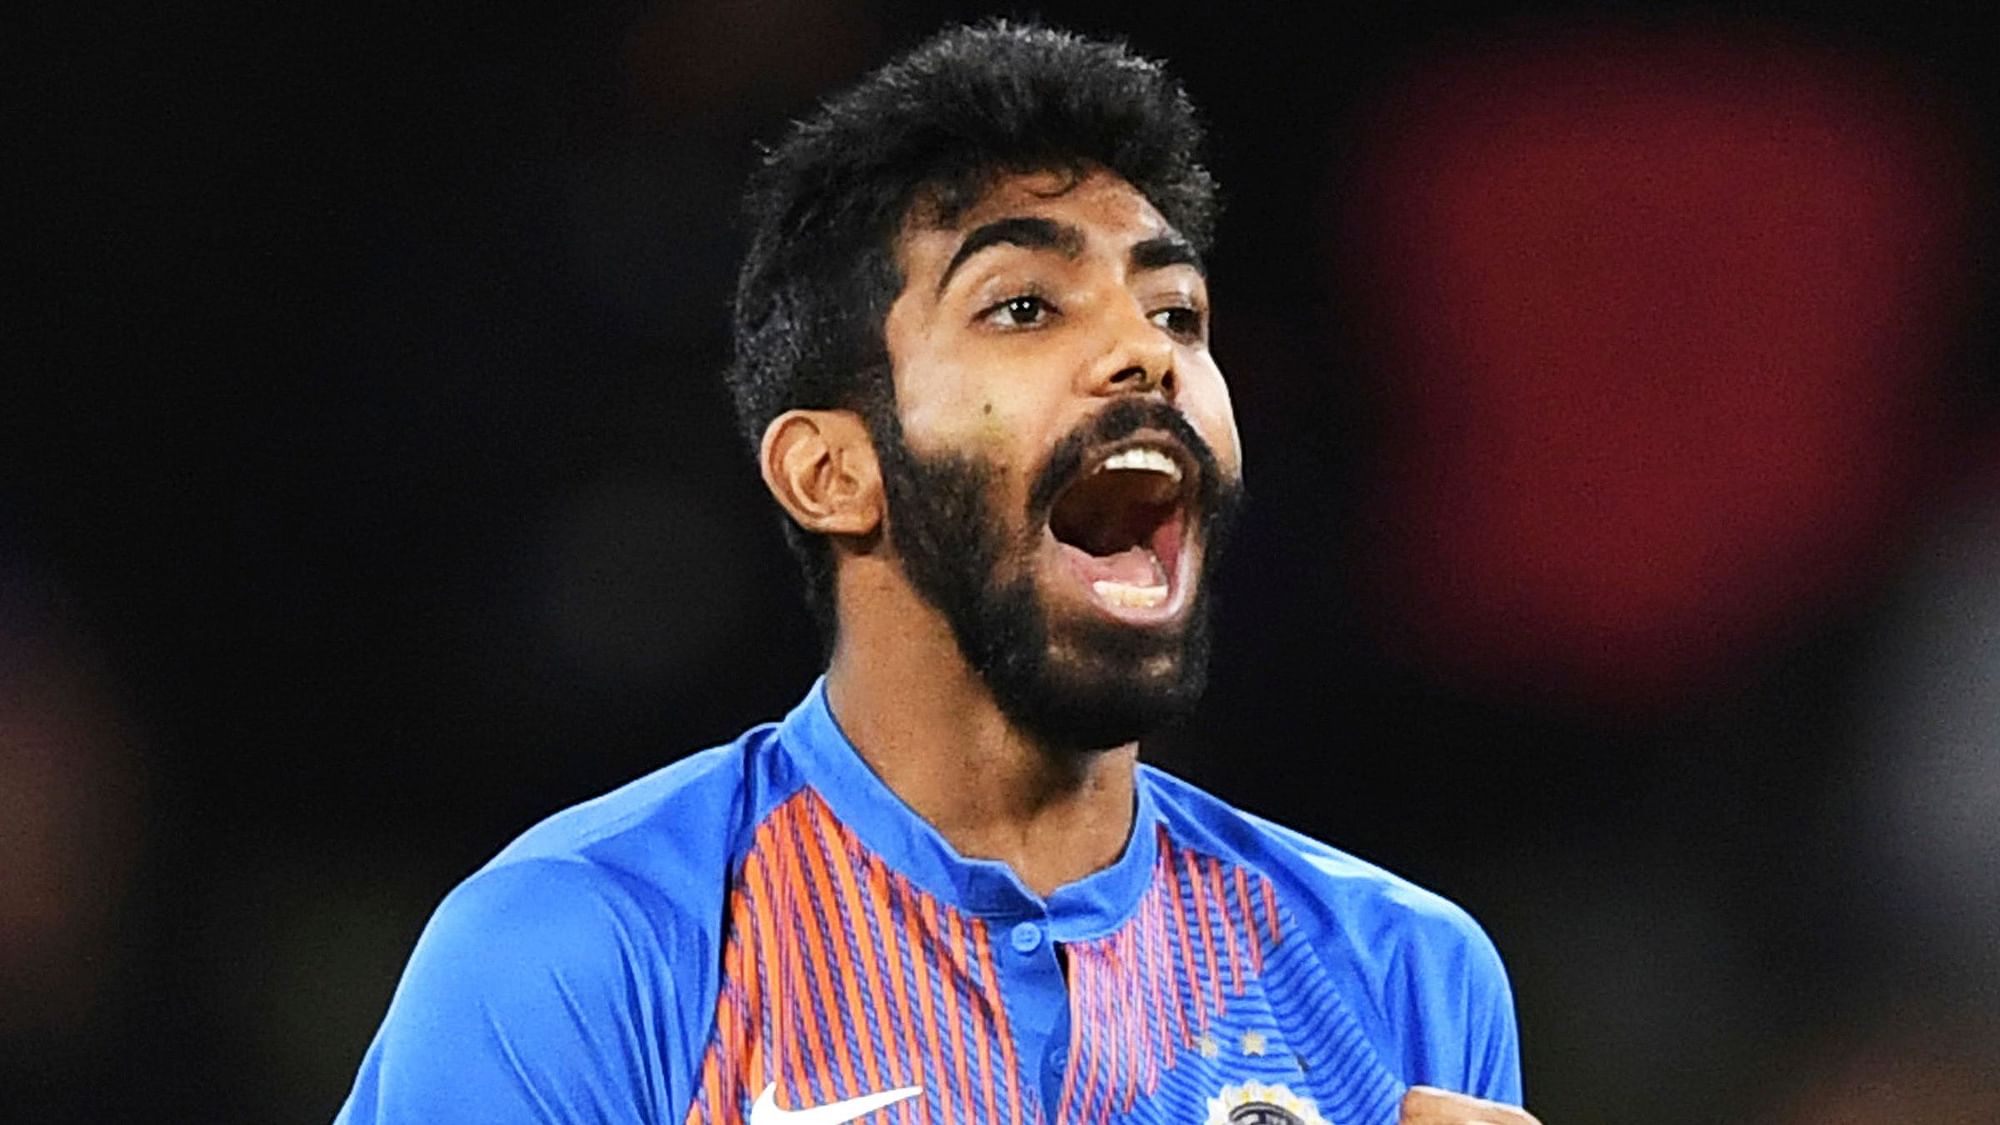 India pace spearhead Jasprit Bumrah said he as learnt a lot from his first tour of New Zealand after returning magical figures of 3/12 in the fifth and final T20I on Sunday,2 February.